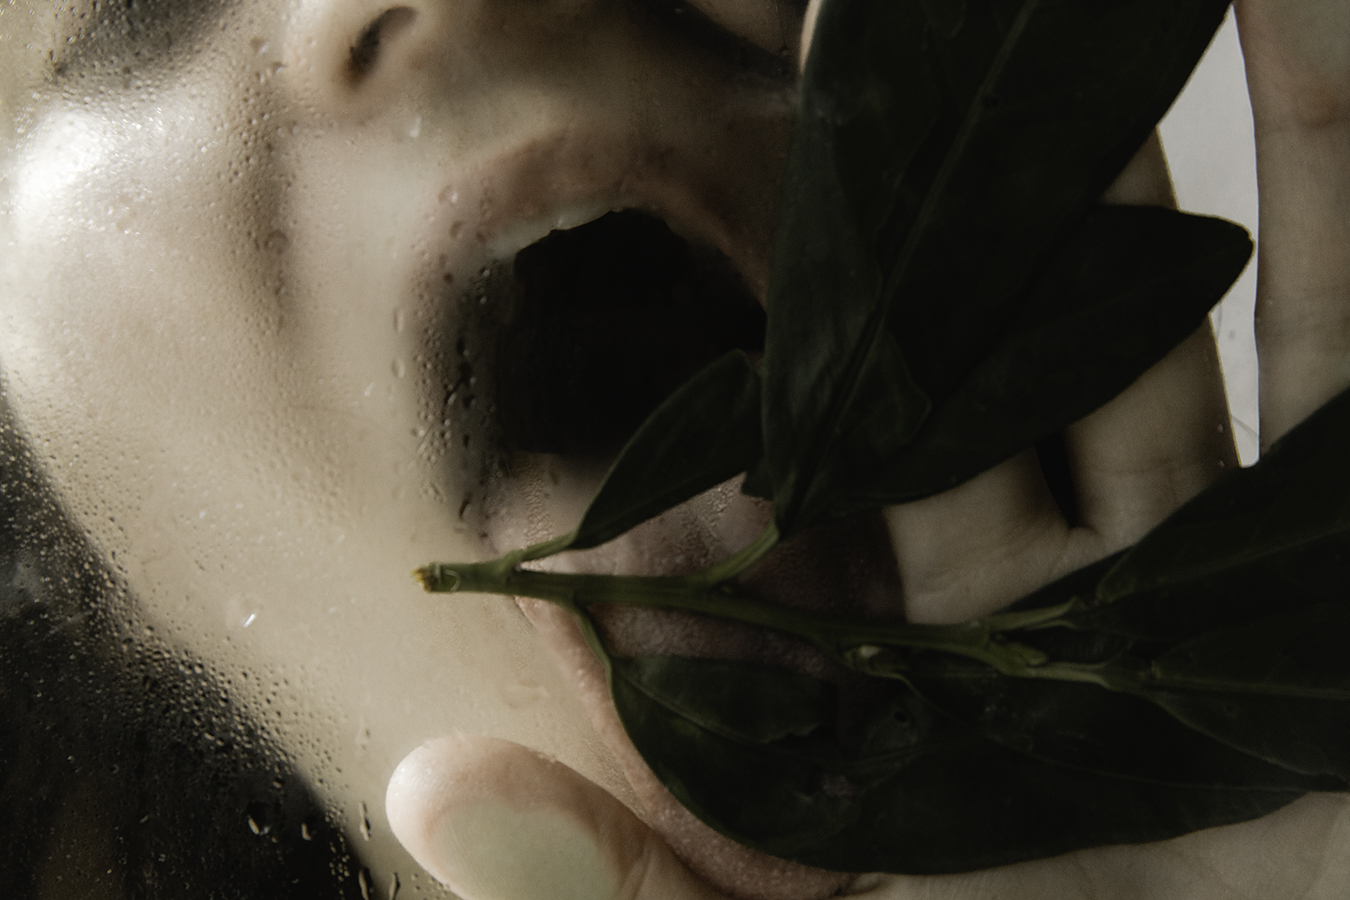 ALEXIS_MASINO_UPENN_TONY_WARD_STUDIO_FASHION_PHOTOGRAPHY_EROTIC_EROTICA_HESPERIDES_DYPTIQUE_GARDEN_APHRODITE_NYMPH_GIRL_WET_WATER_GLASS_NUDE_SKIN_GREEN_MOUTH_TONGUE_LEAF_PLANT_TEETH